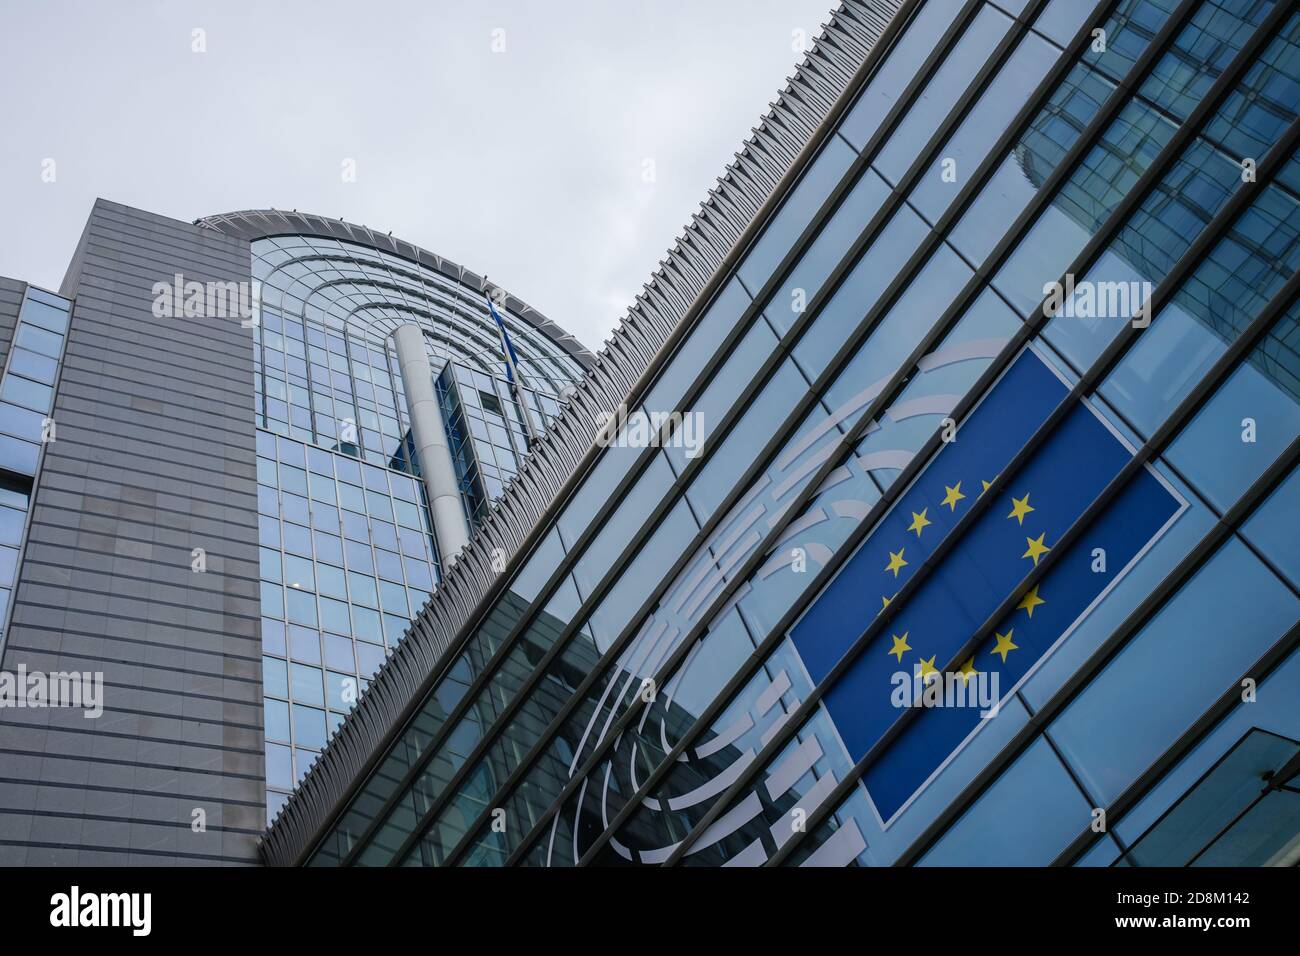 BRUSSELS, BELGIUM - Oct 21, 2020: Detail of the European parliament building, focus on the EU flag. Photo taken on a cloudy day Stock Photo